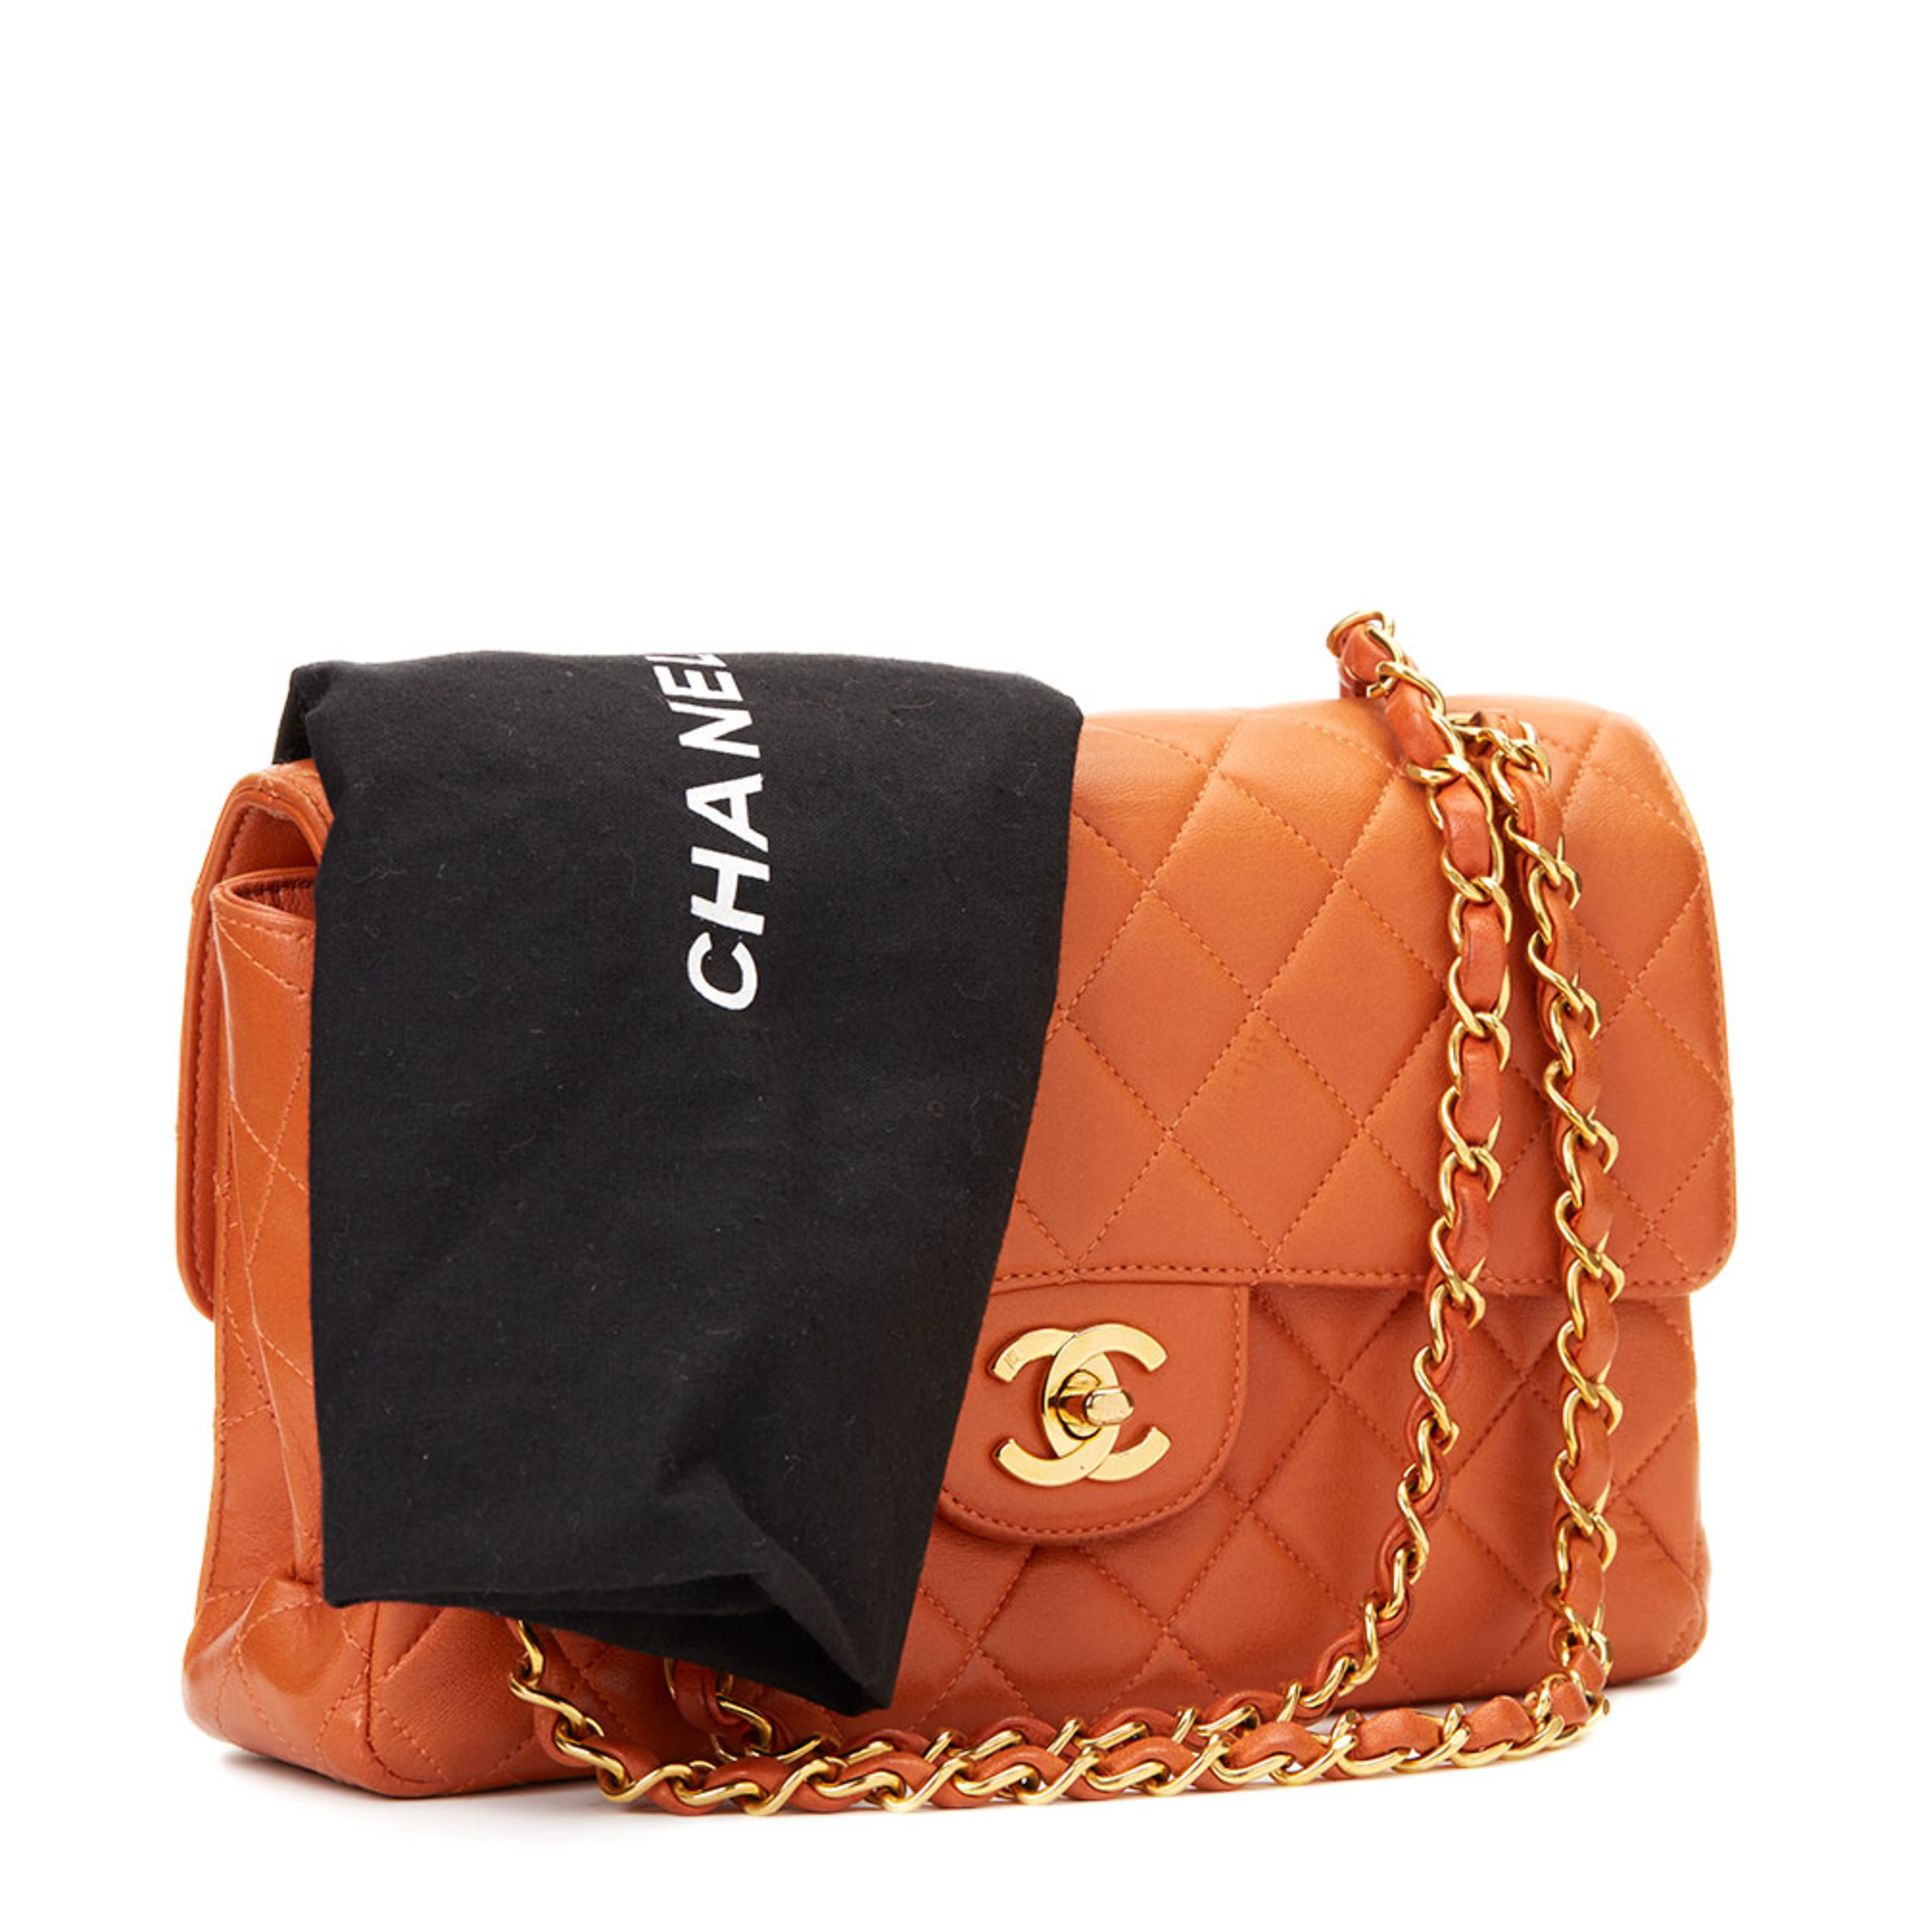 Chanel Burnt Orange Quilted Lambskin Small Double Sided Classic Flap Bag - Image 10 of 10